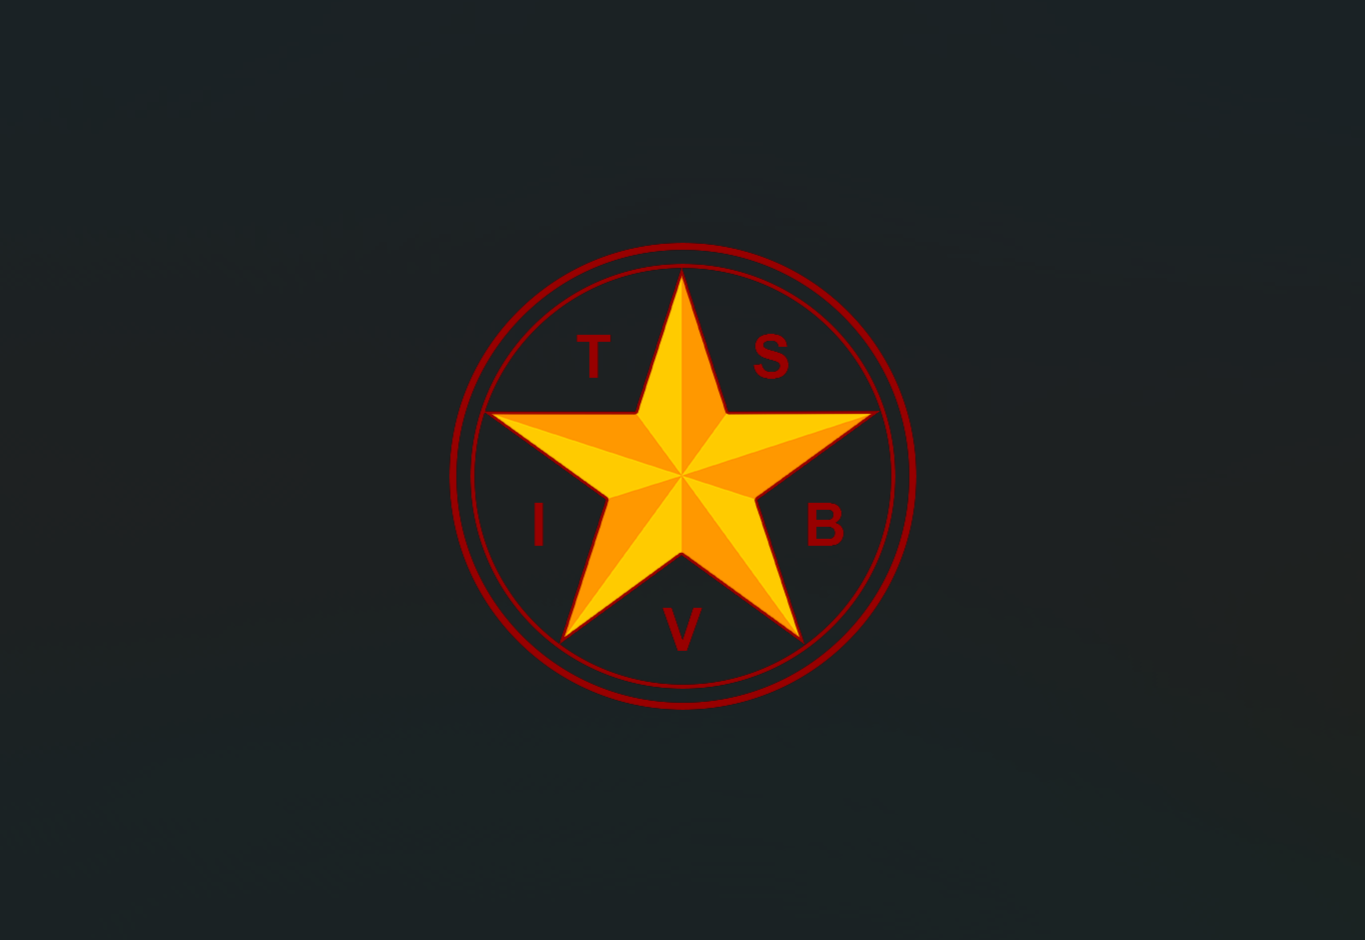 Texas School for the Blind logo that has a star in the middle